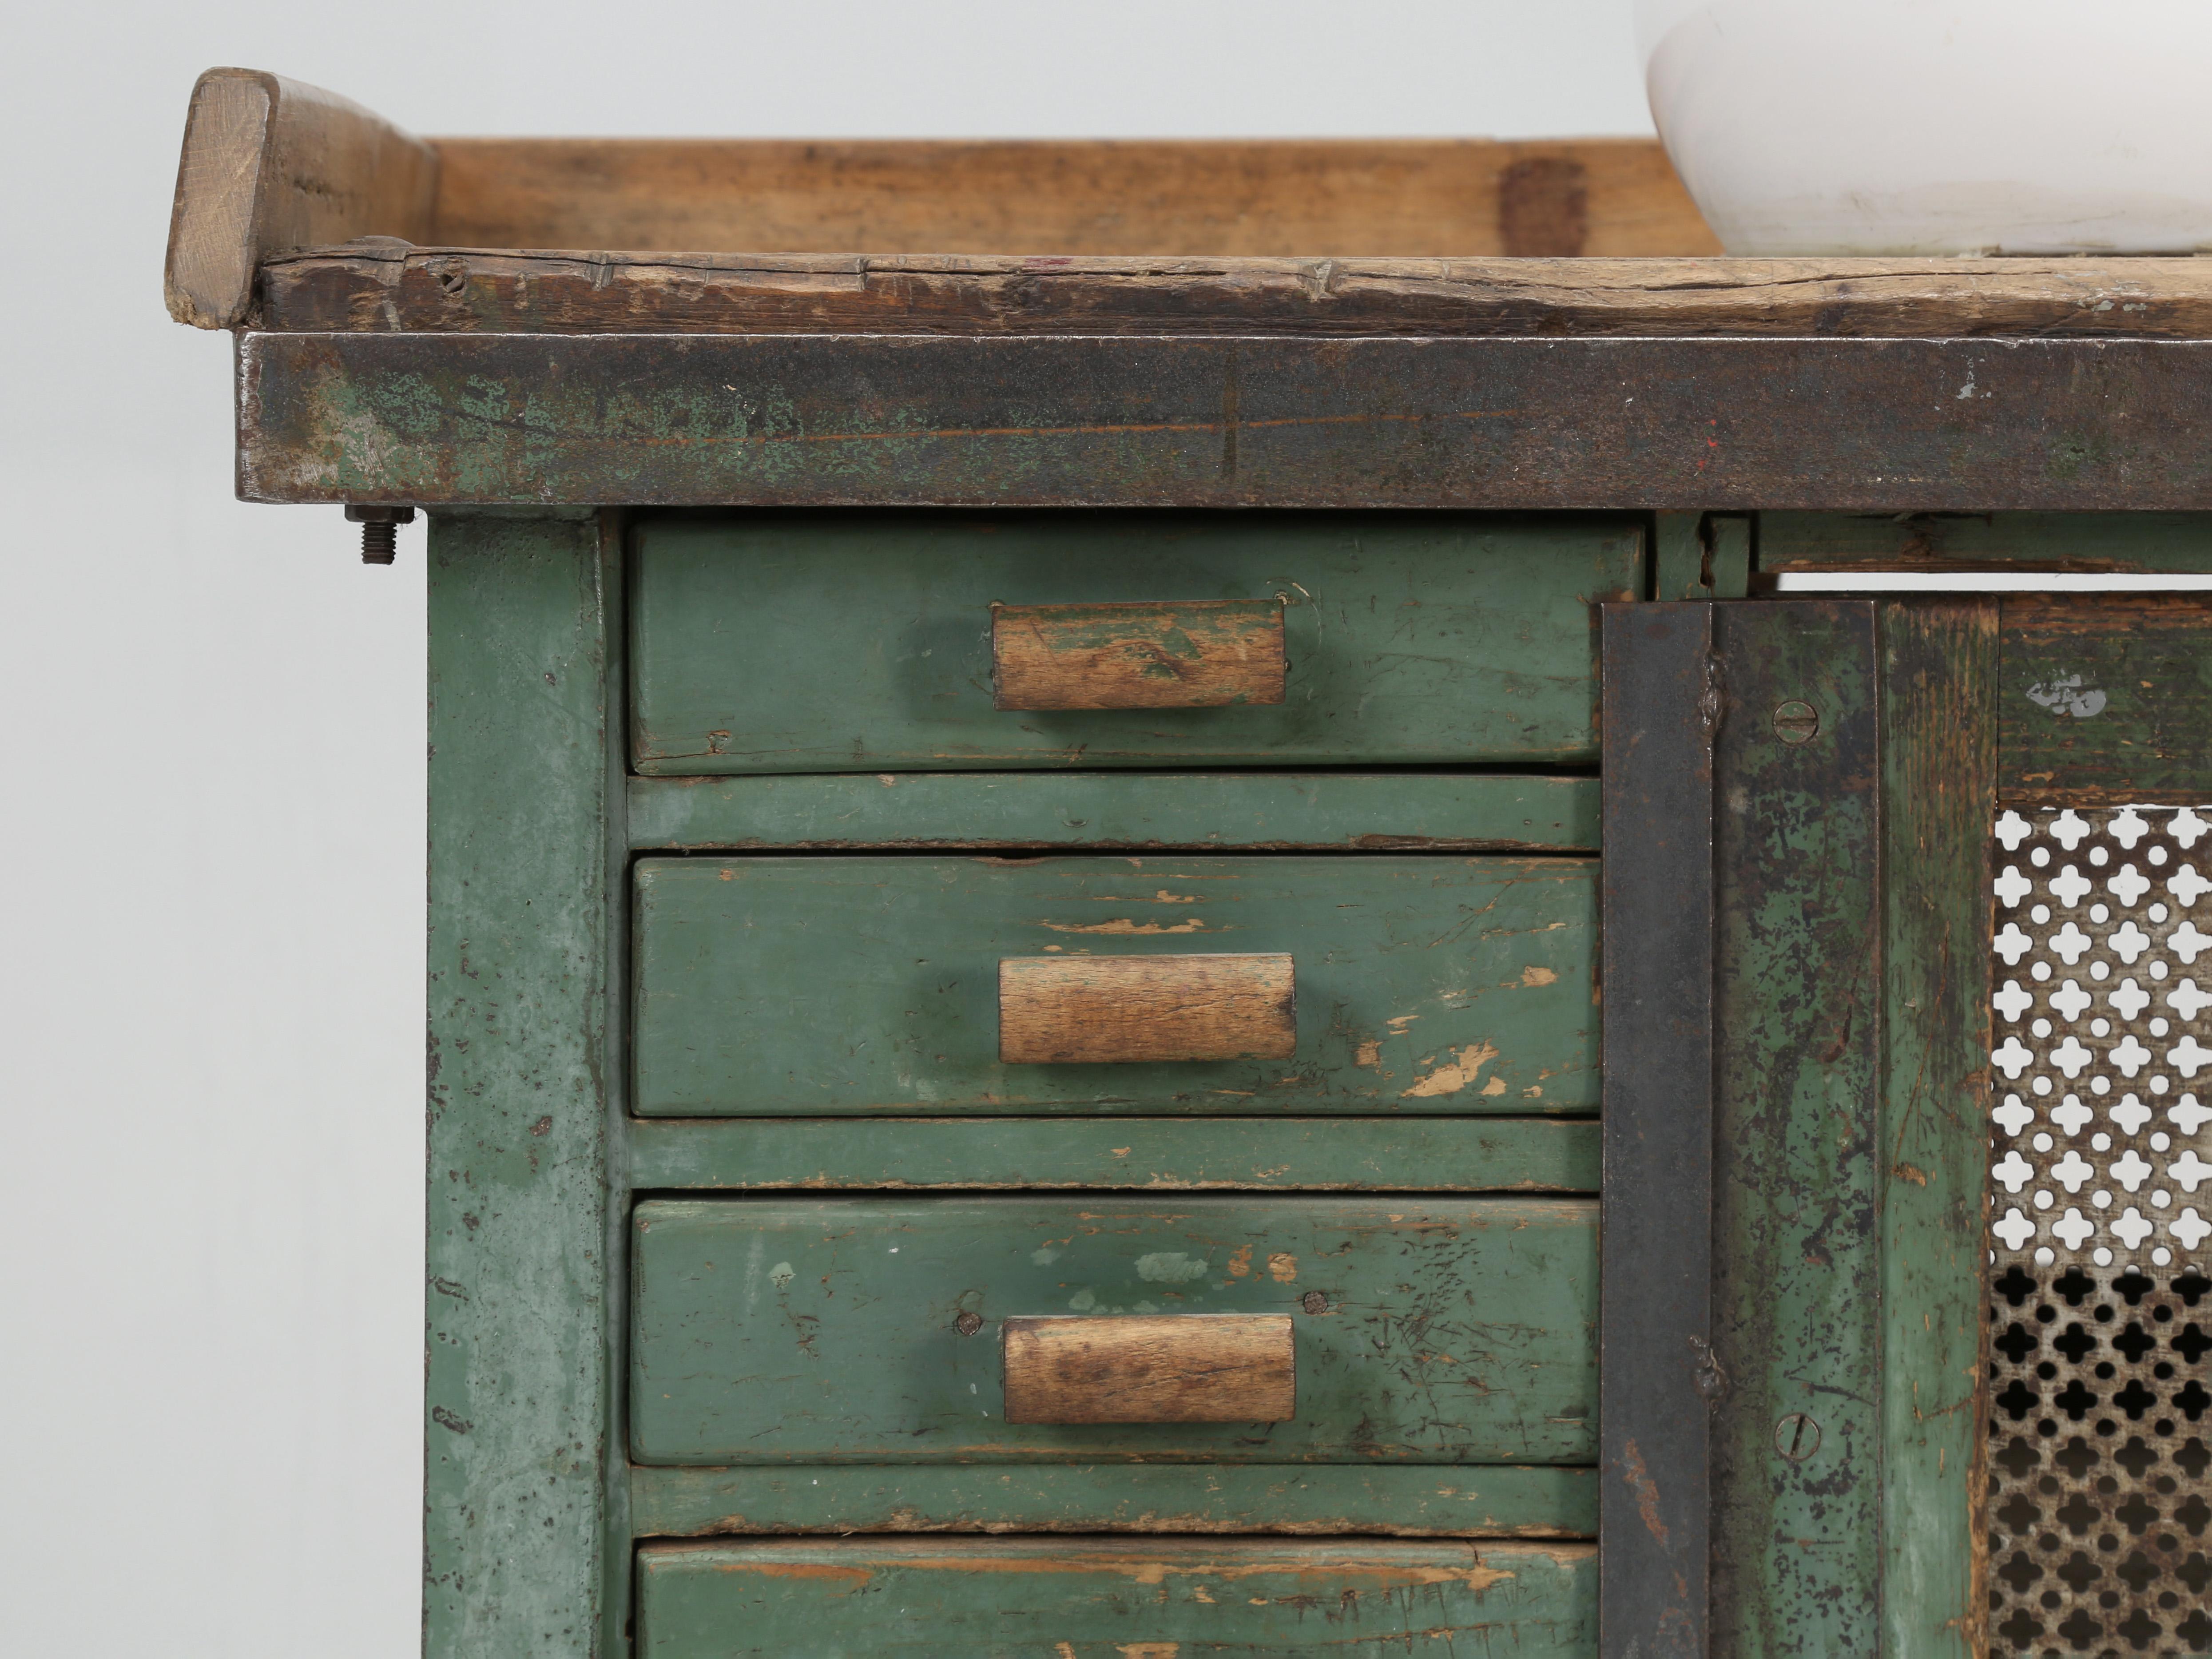 Antique French Industrial Painted Cabinet Converted to a Bathroom Vanity Sink  5